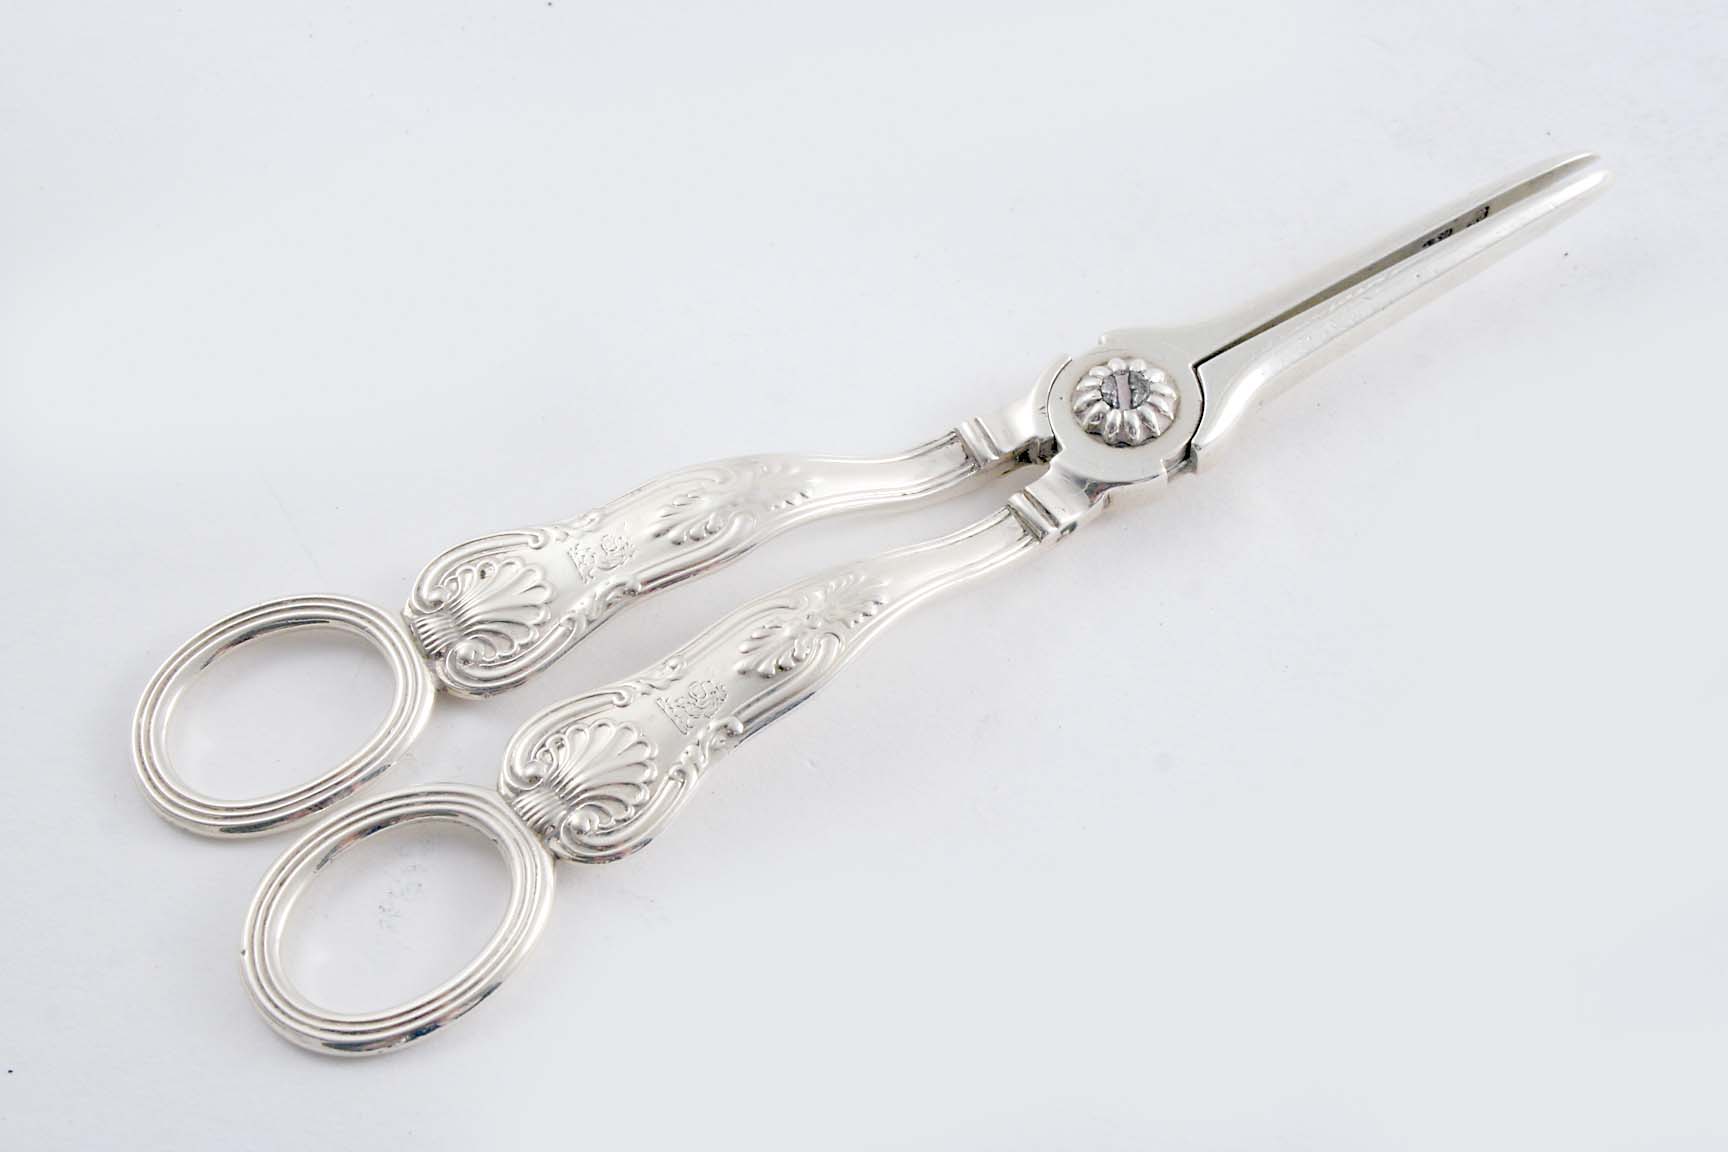 A PAIR OF EARLY VICTORIAN KING`S PATTERN GRAPE SHEARS crested, by C. Rawlings & W. Summers, London